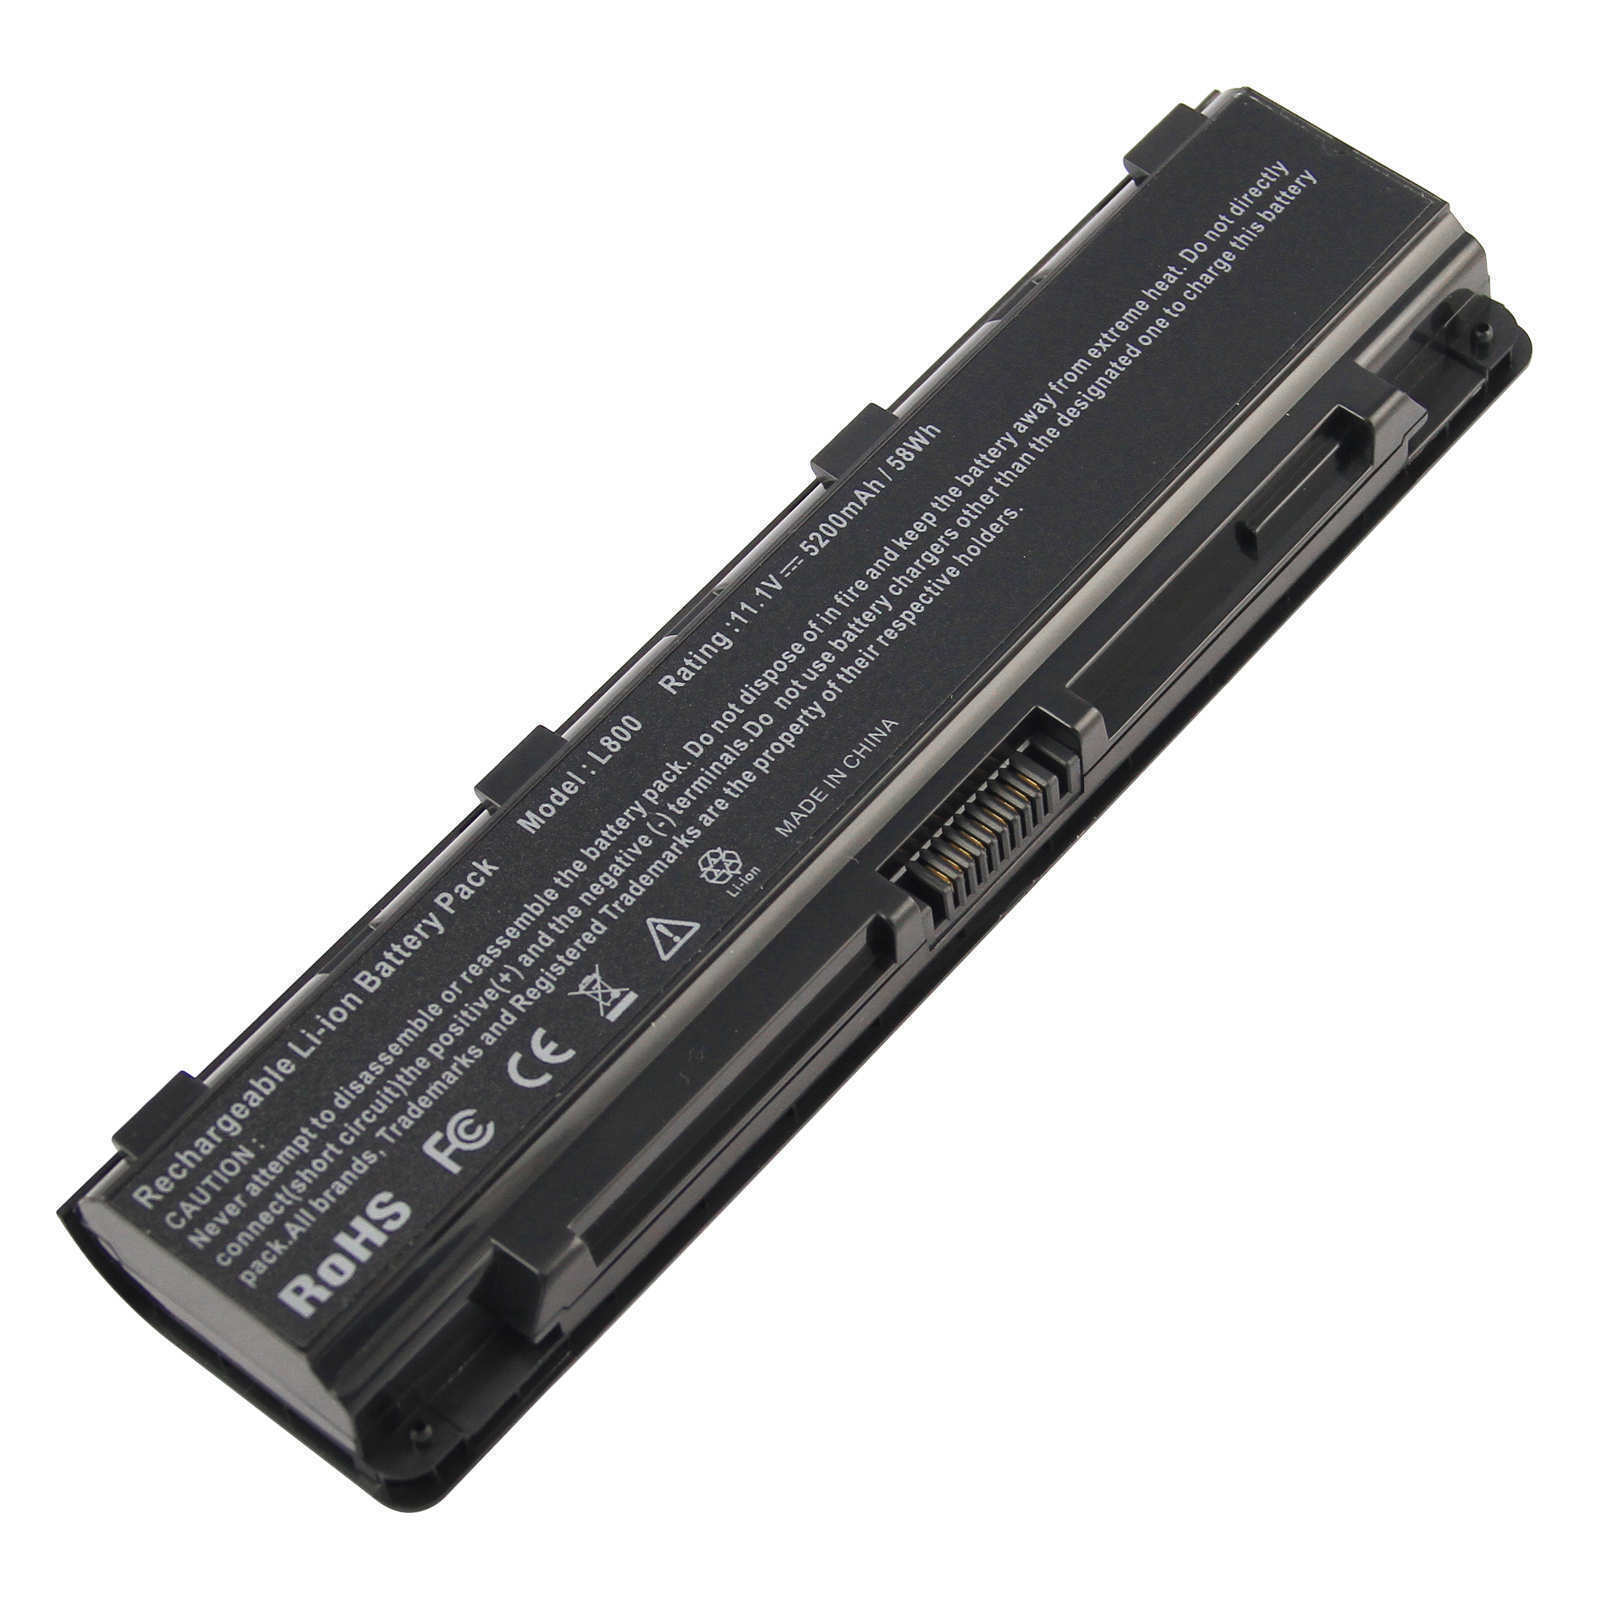 PA5109U-1BRS Battery for Toshiba Satellite S855D-S5120 S855-S5165 S855-S5369